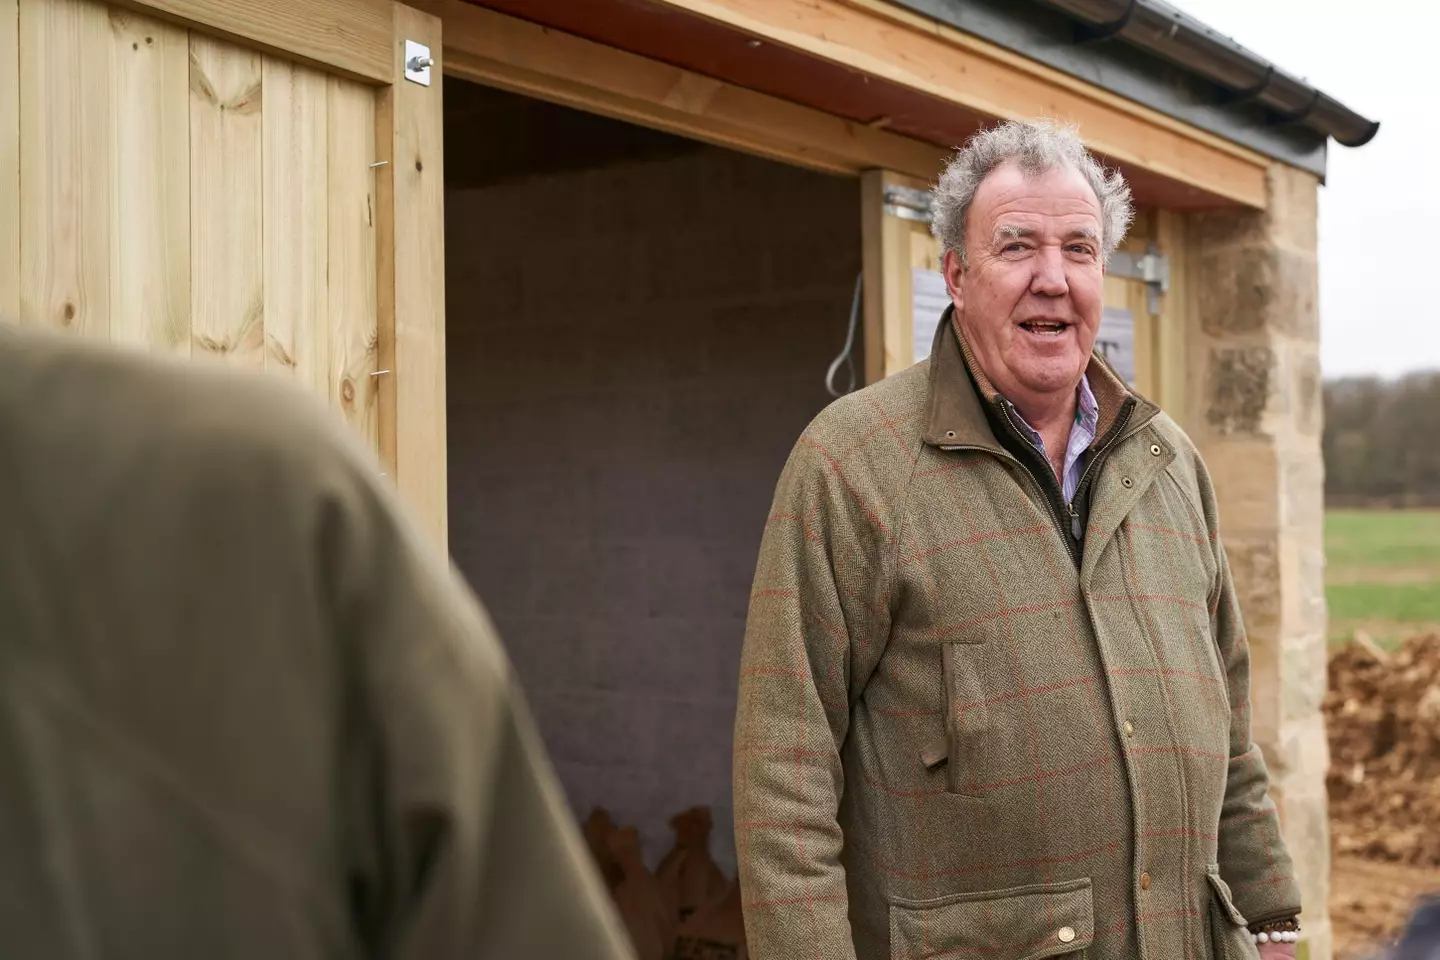 Jeremy Clarkson said he'd keep his farm going even if his farming show ends.